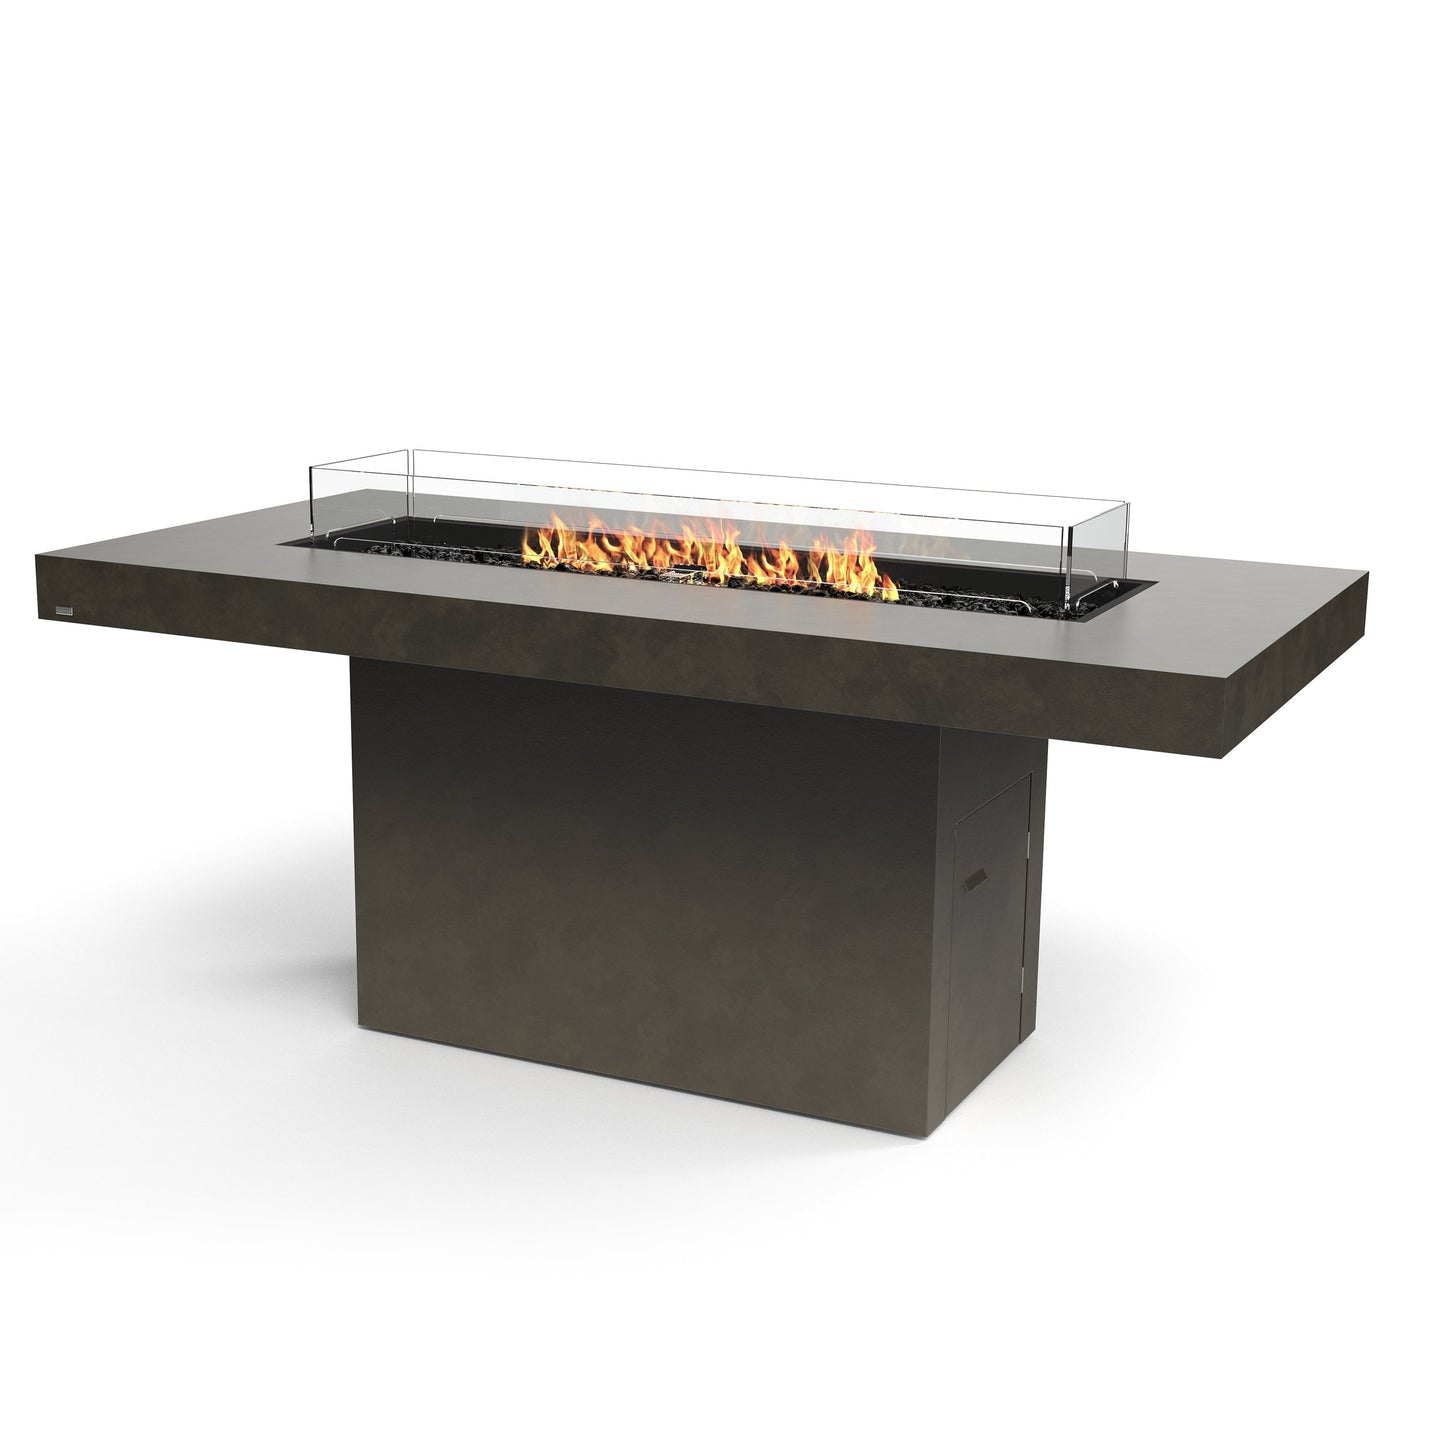 EcoSmart Fire 89" Gin 90 Bar Height Fire Pit Table with Gas LP/NG Burner by Mad Design Group